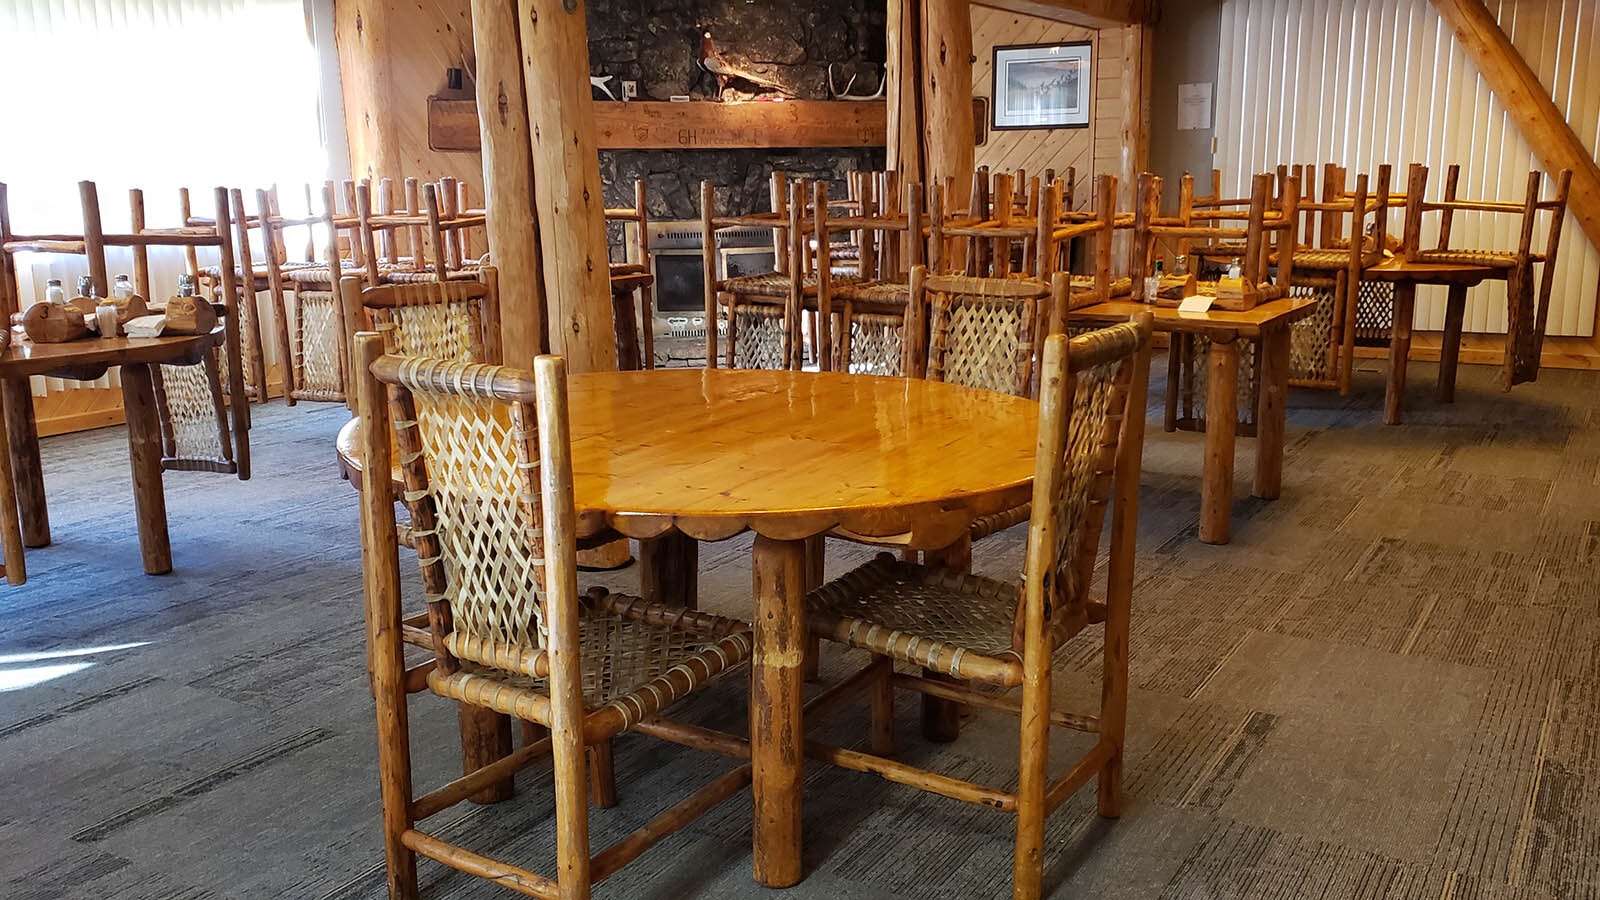 The dining area at Granite Creek Ranch.